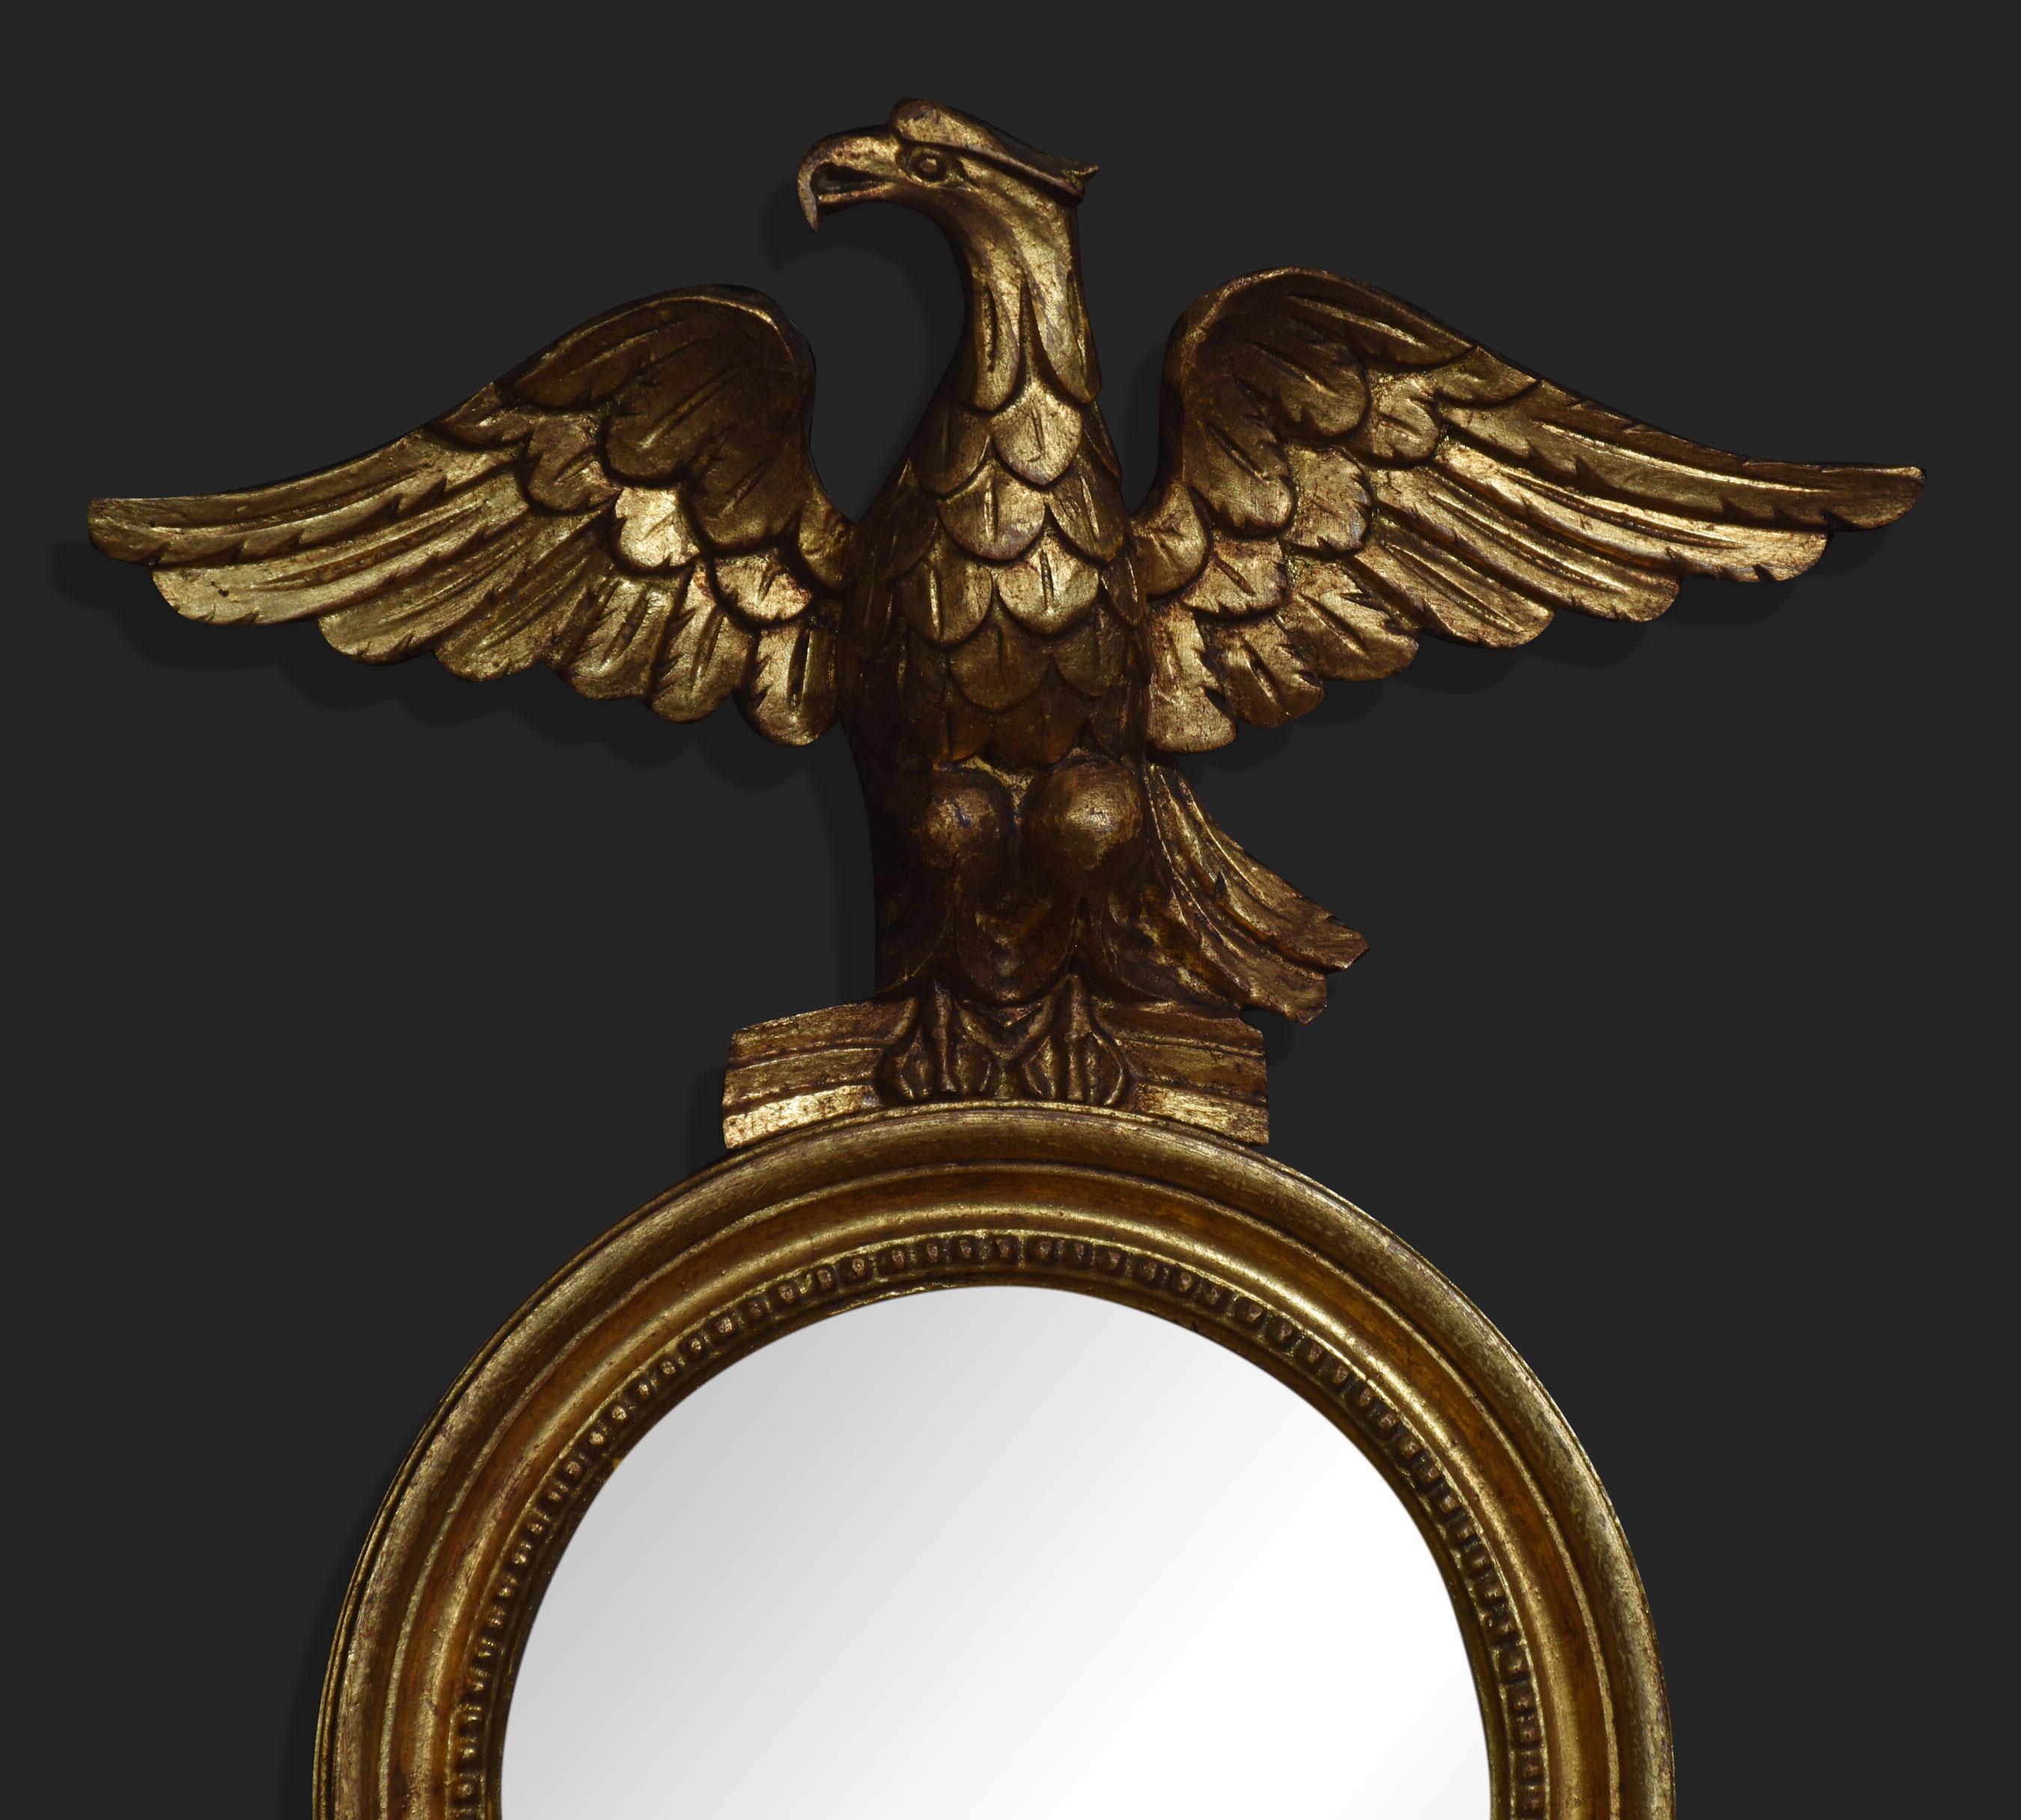 Pair of Regency style wall mirrors, the eagle crest above circular mirror encased in giltwood frame with twin branch light sconces.
Dimensions
Height 32 Inches
Width 14 Inches
Depth 6 Inches